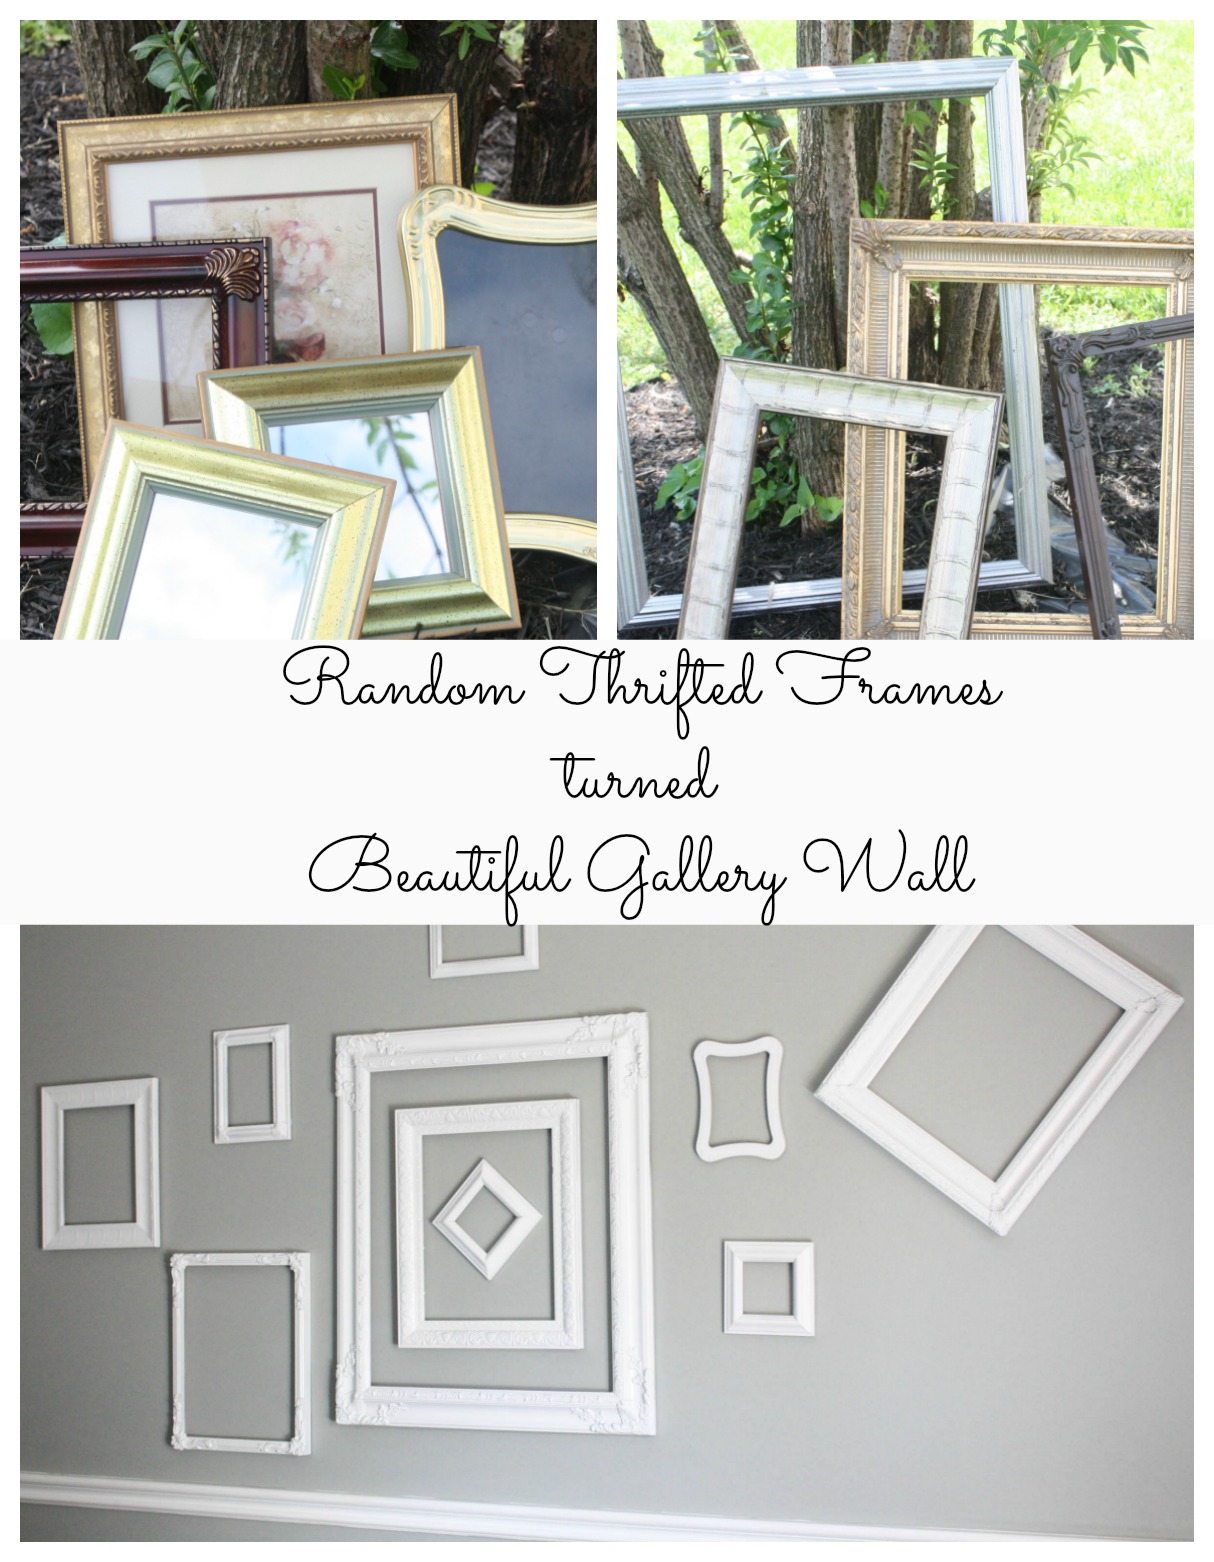 Random Thrift Store Frames turned Cohesive Gallery Wall - Re-Fabbed